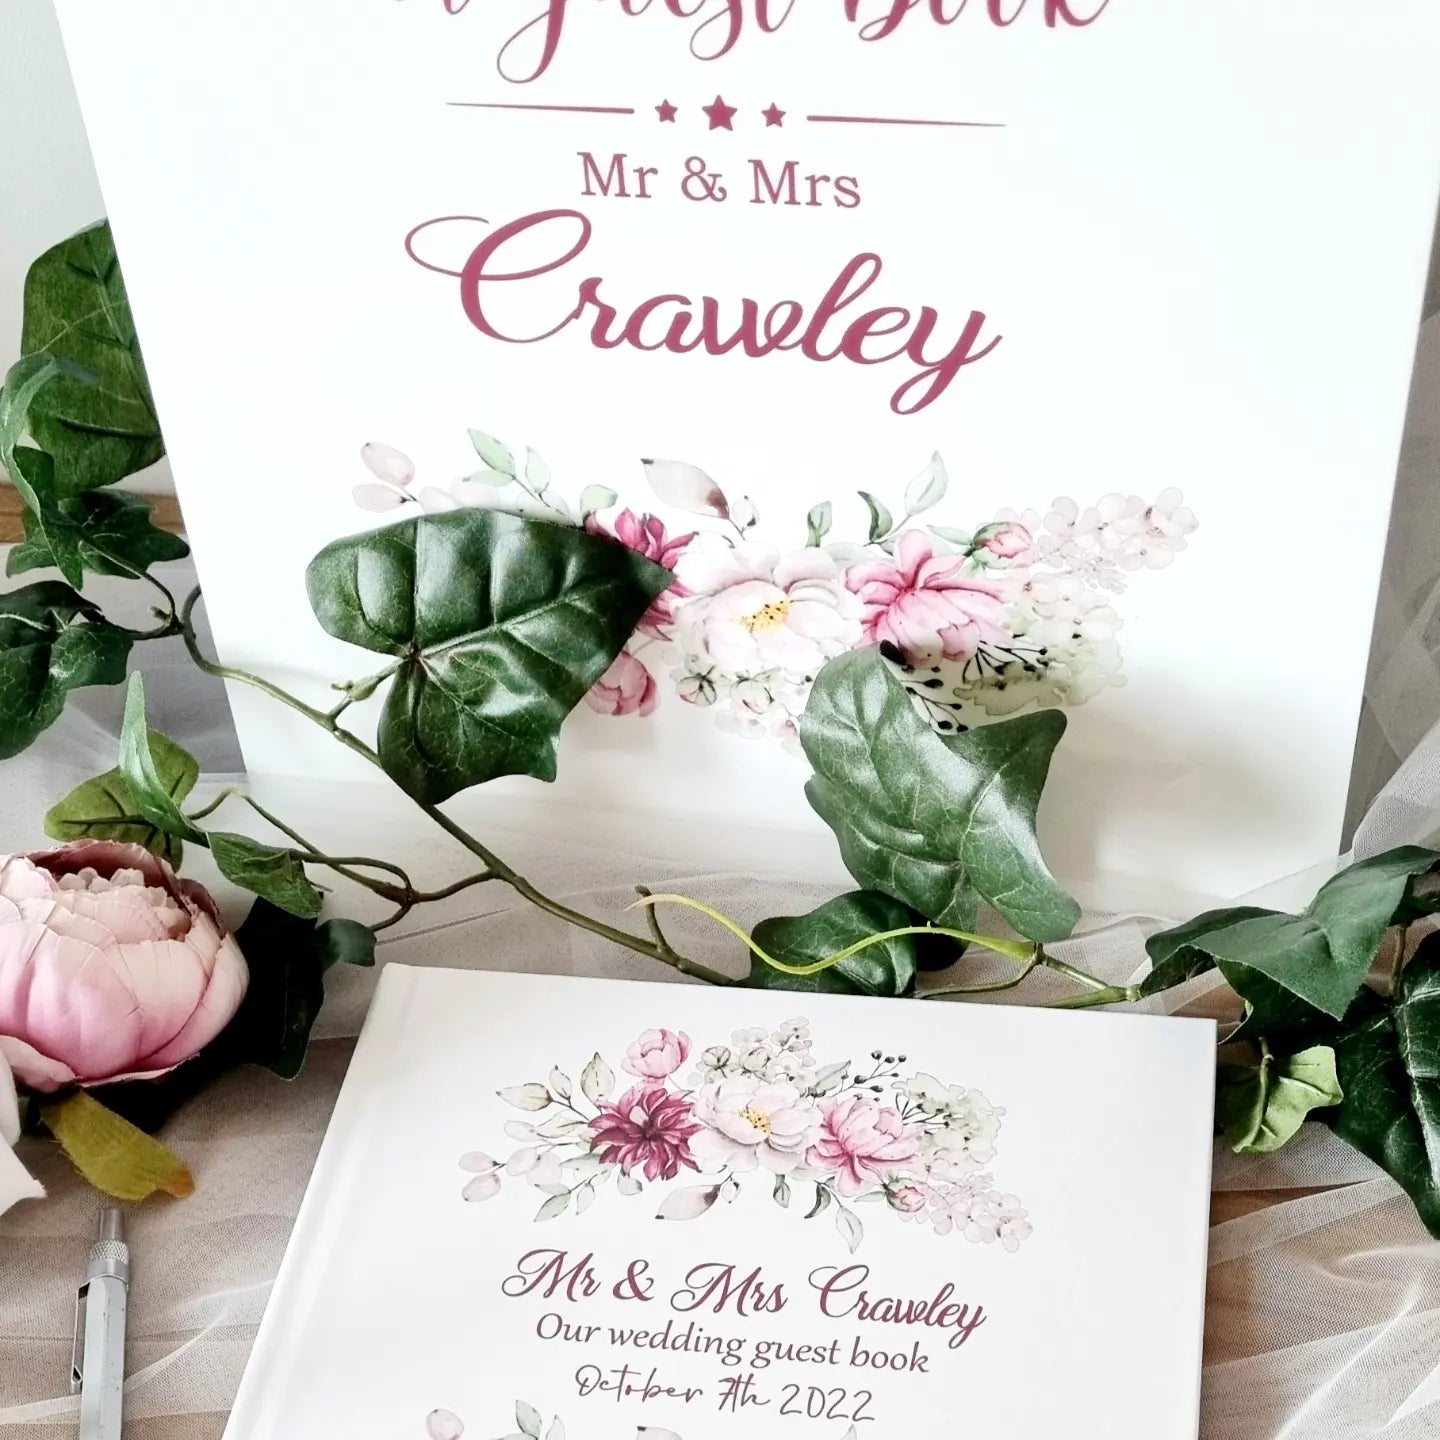 Personalised wedding guest book with pink and burgundy floral details with couples name and wedding date. Matching A3 Acrylic Sign